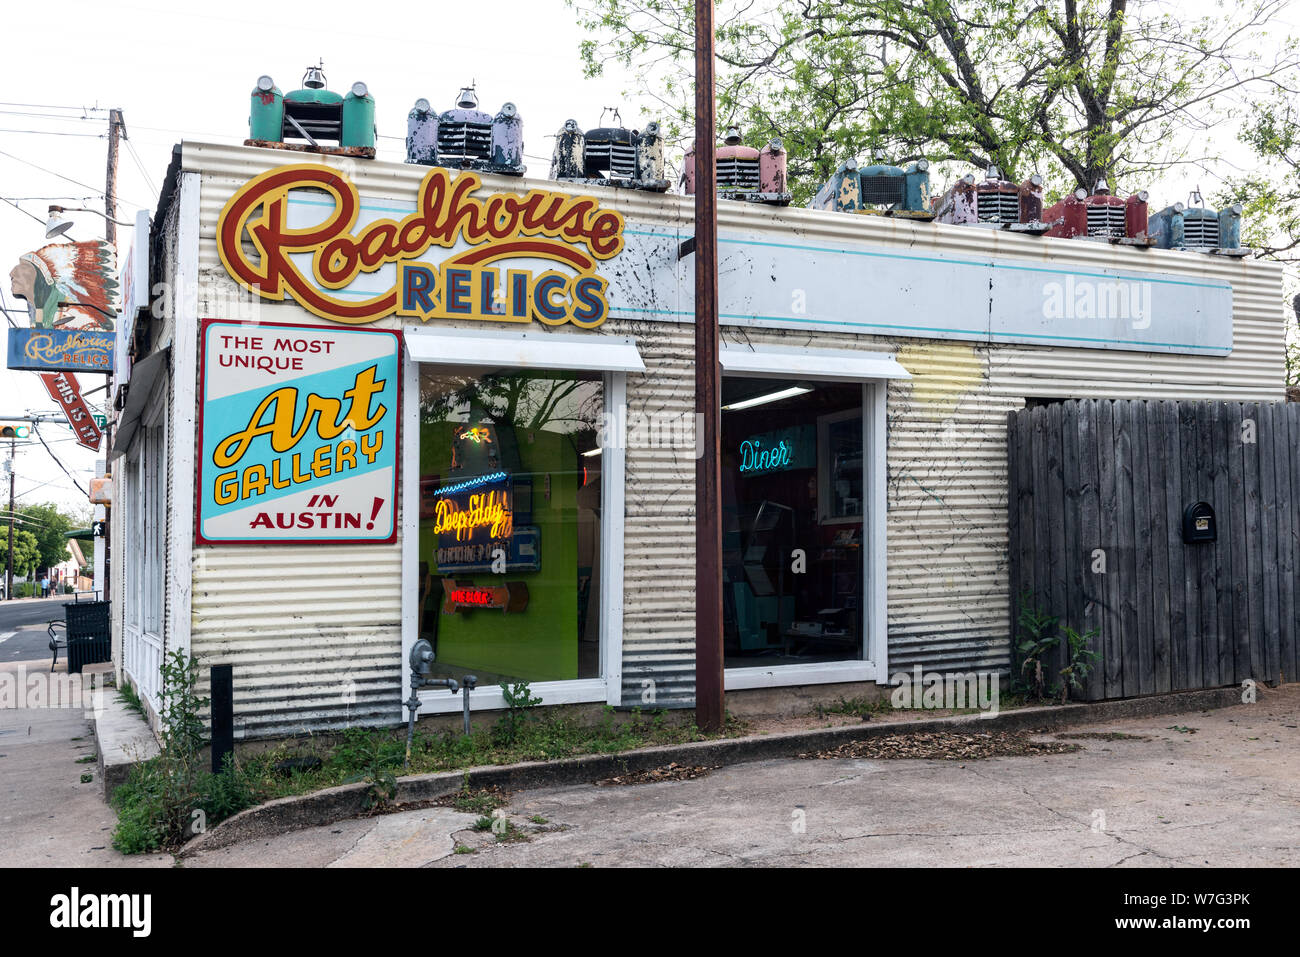 An antique, collectibles, or junk store (take your pick) in the eclectic South Austin neighborhood of Austin, Texas Stock Photo